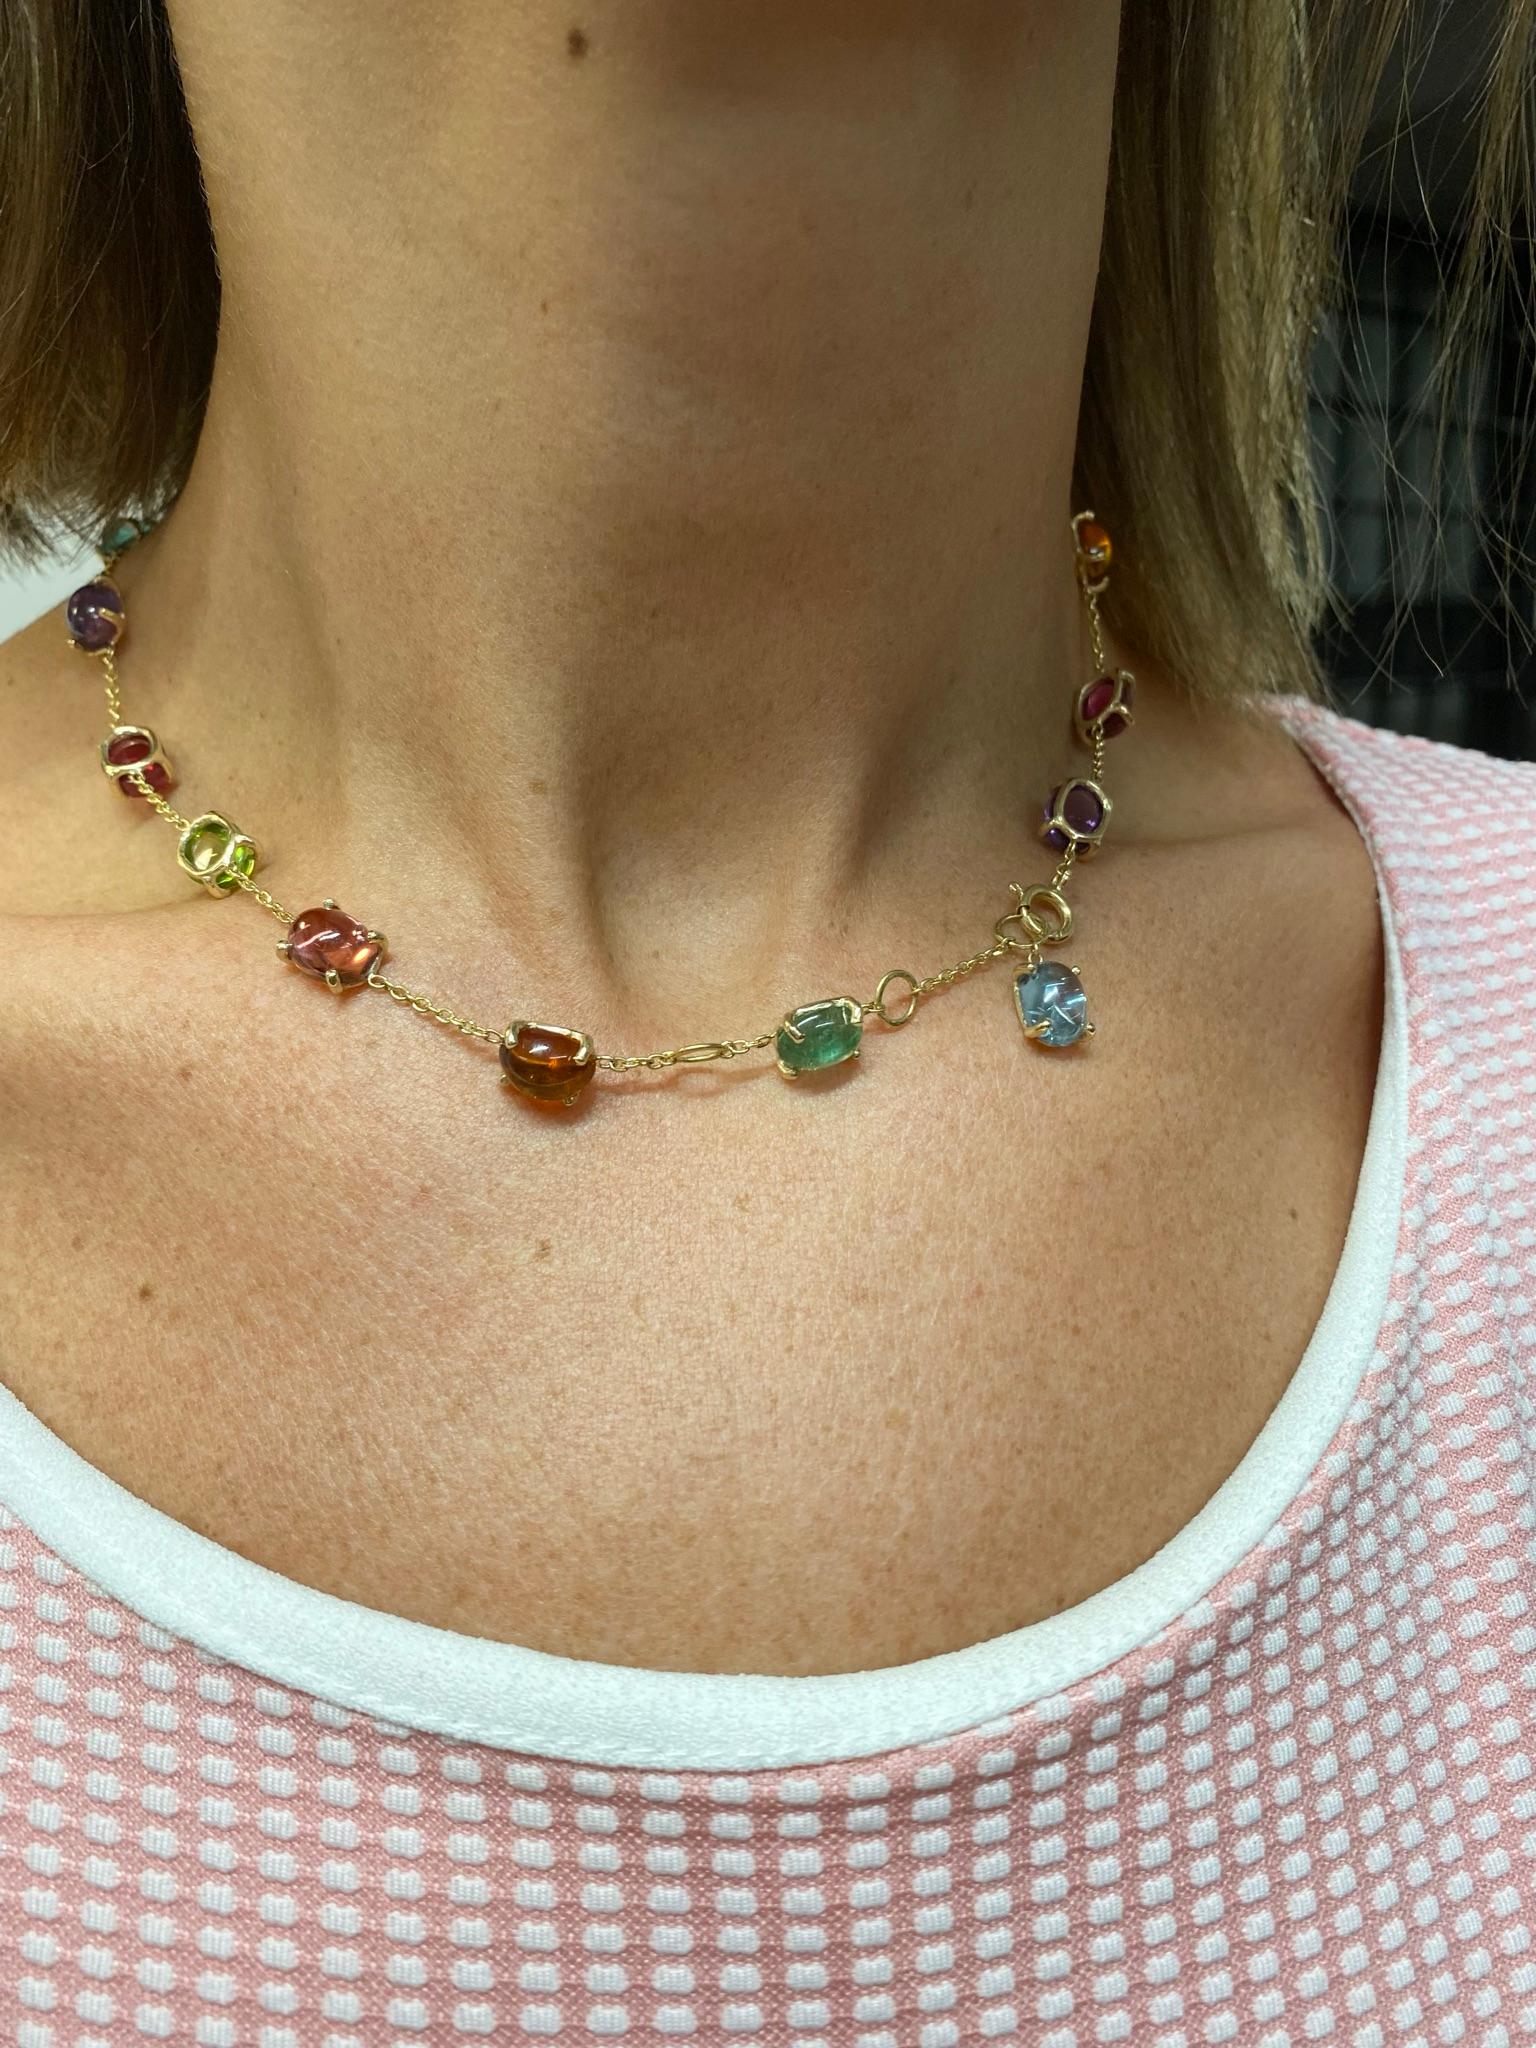 Rossella Ugolini Design Collection, 18 Karat Yellow Gold Feisty Necklace Oval cut Amethyst Garnet Citrine Peridot Tourmaline
A feisty necklace colored stones made of one line of the 18 Karat yellow gold chain embellished with 18 th stones: Peridot,